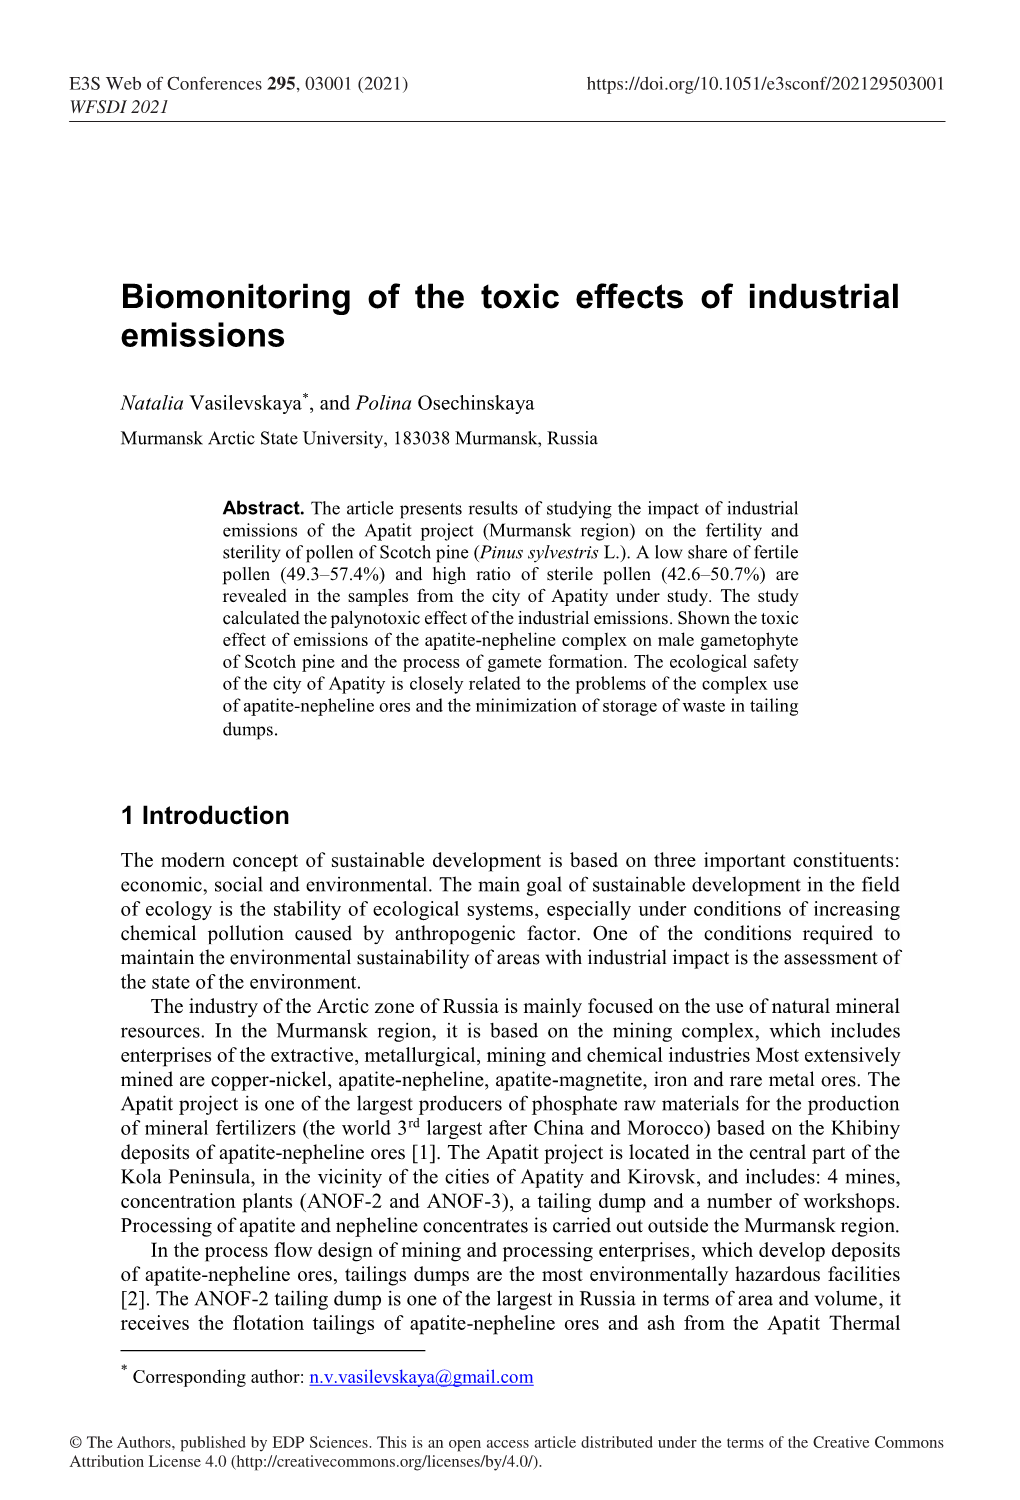 Biomonitoring of the Toxic Effects of Industrial Emissions